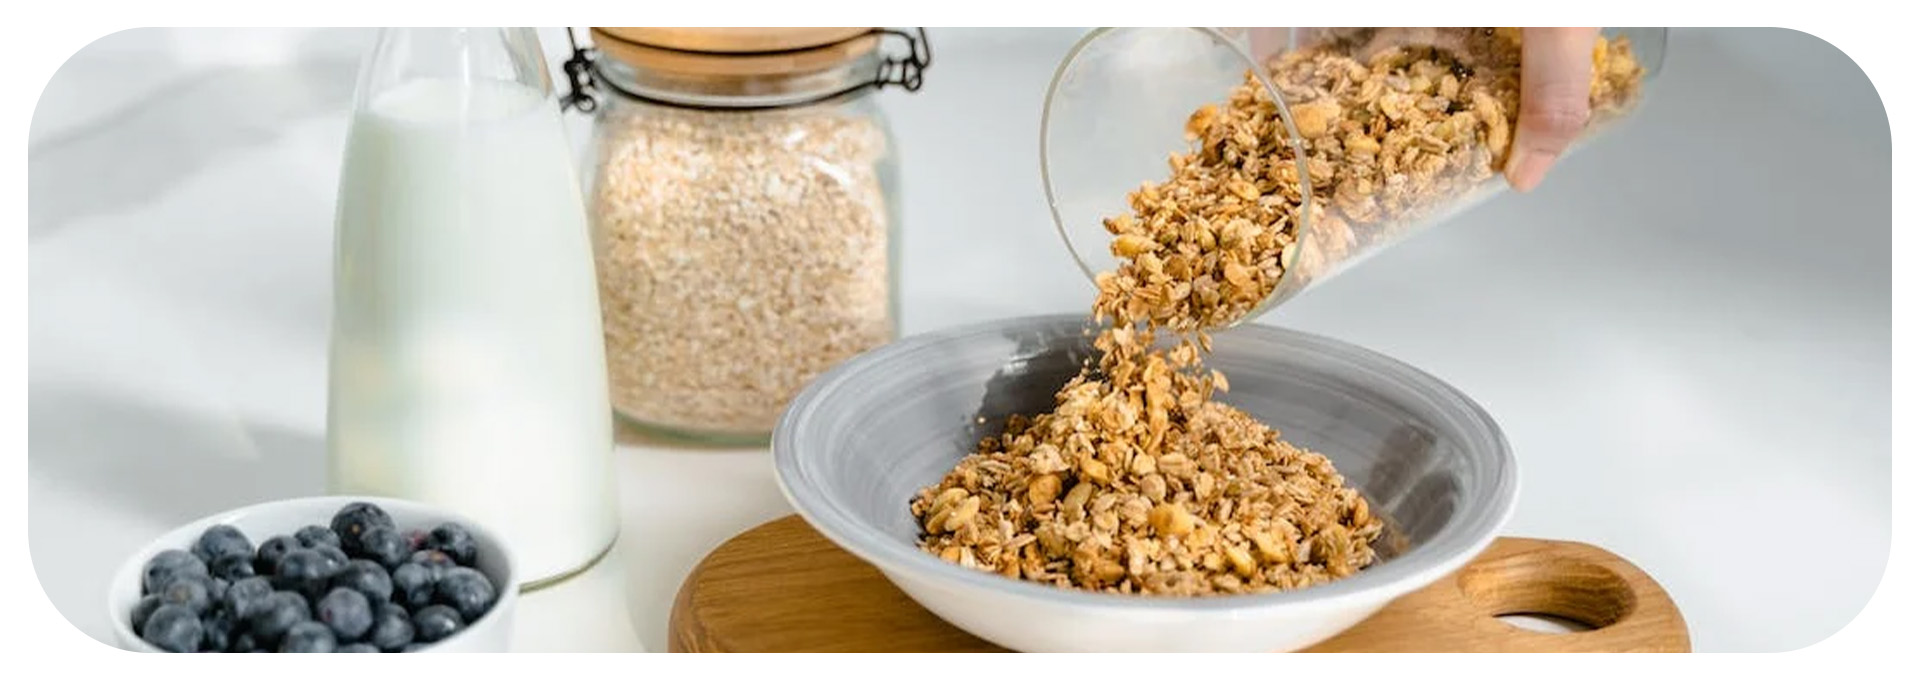 Pouring Granola on a bowl.